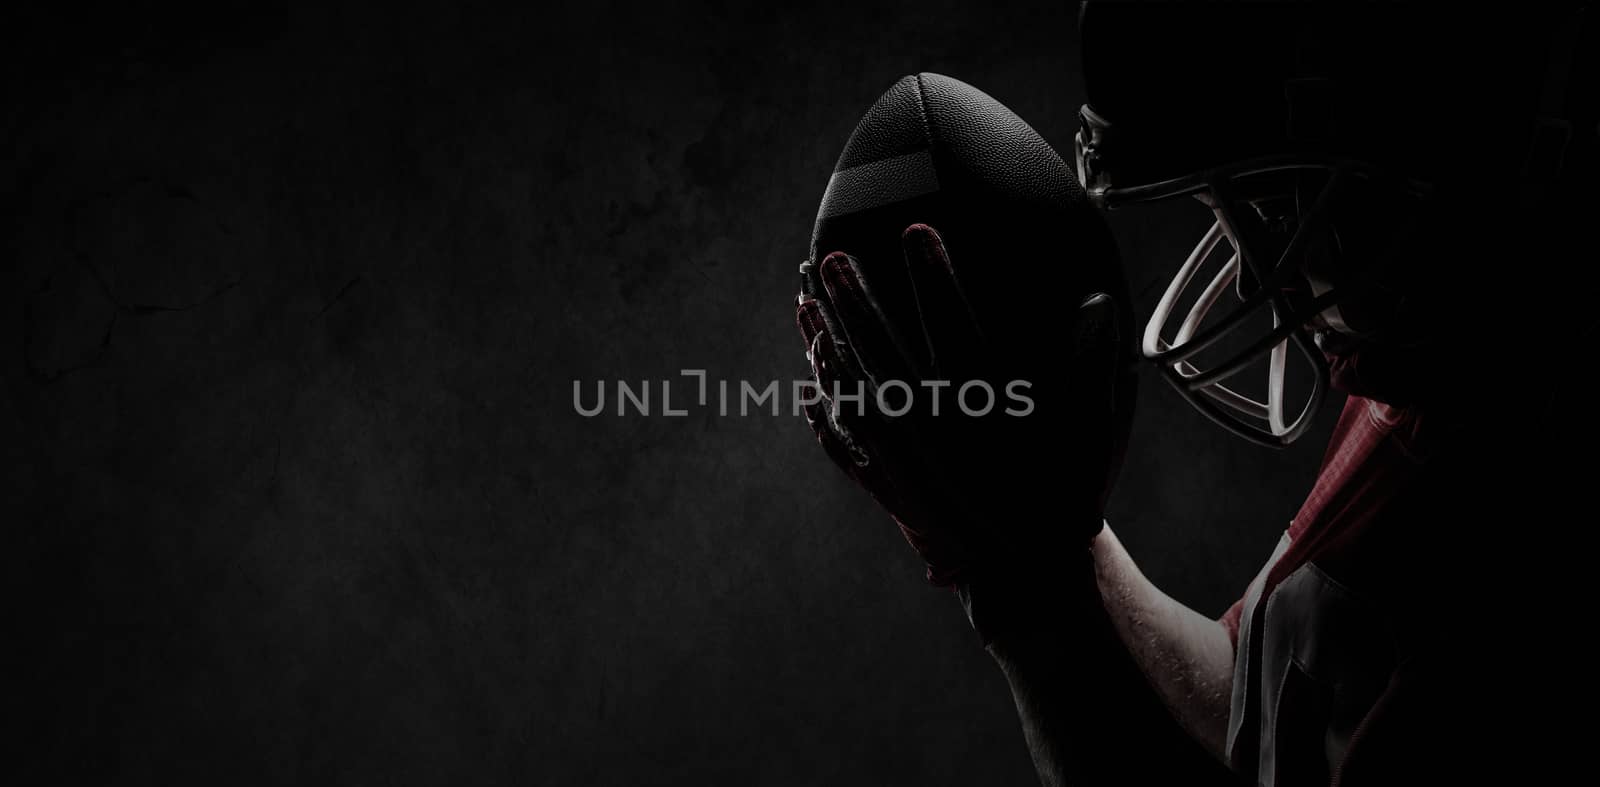 American football player standing with rugby helmet and ball against full frame shot of concrete wall